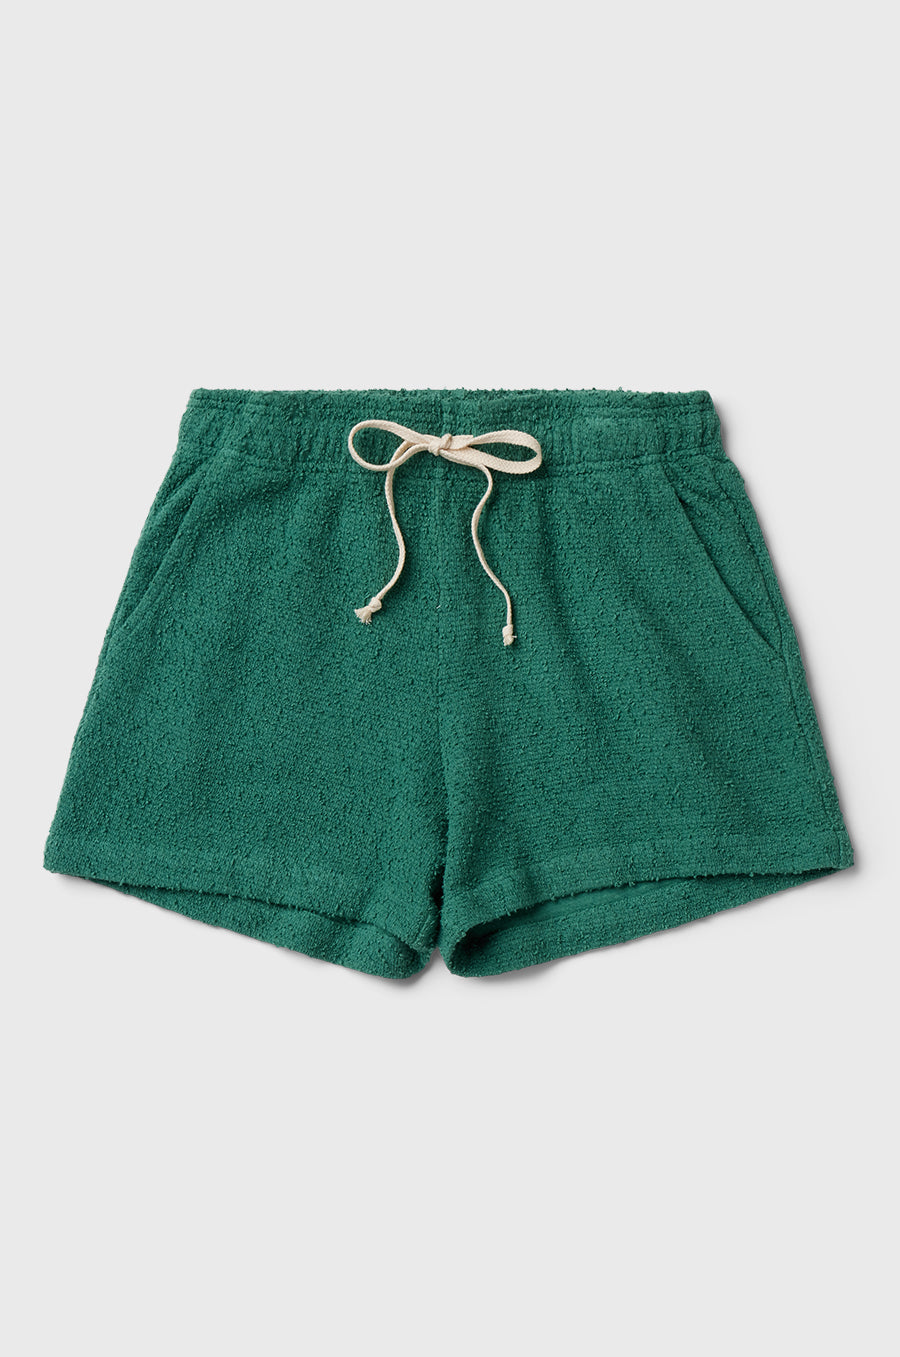 the lady & the sailor Weekend Short in Sage Boucle.